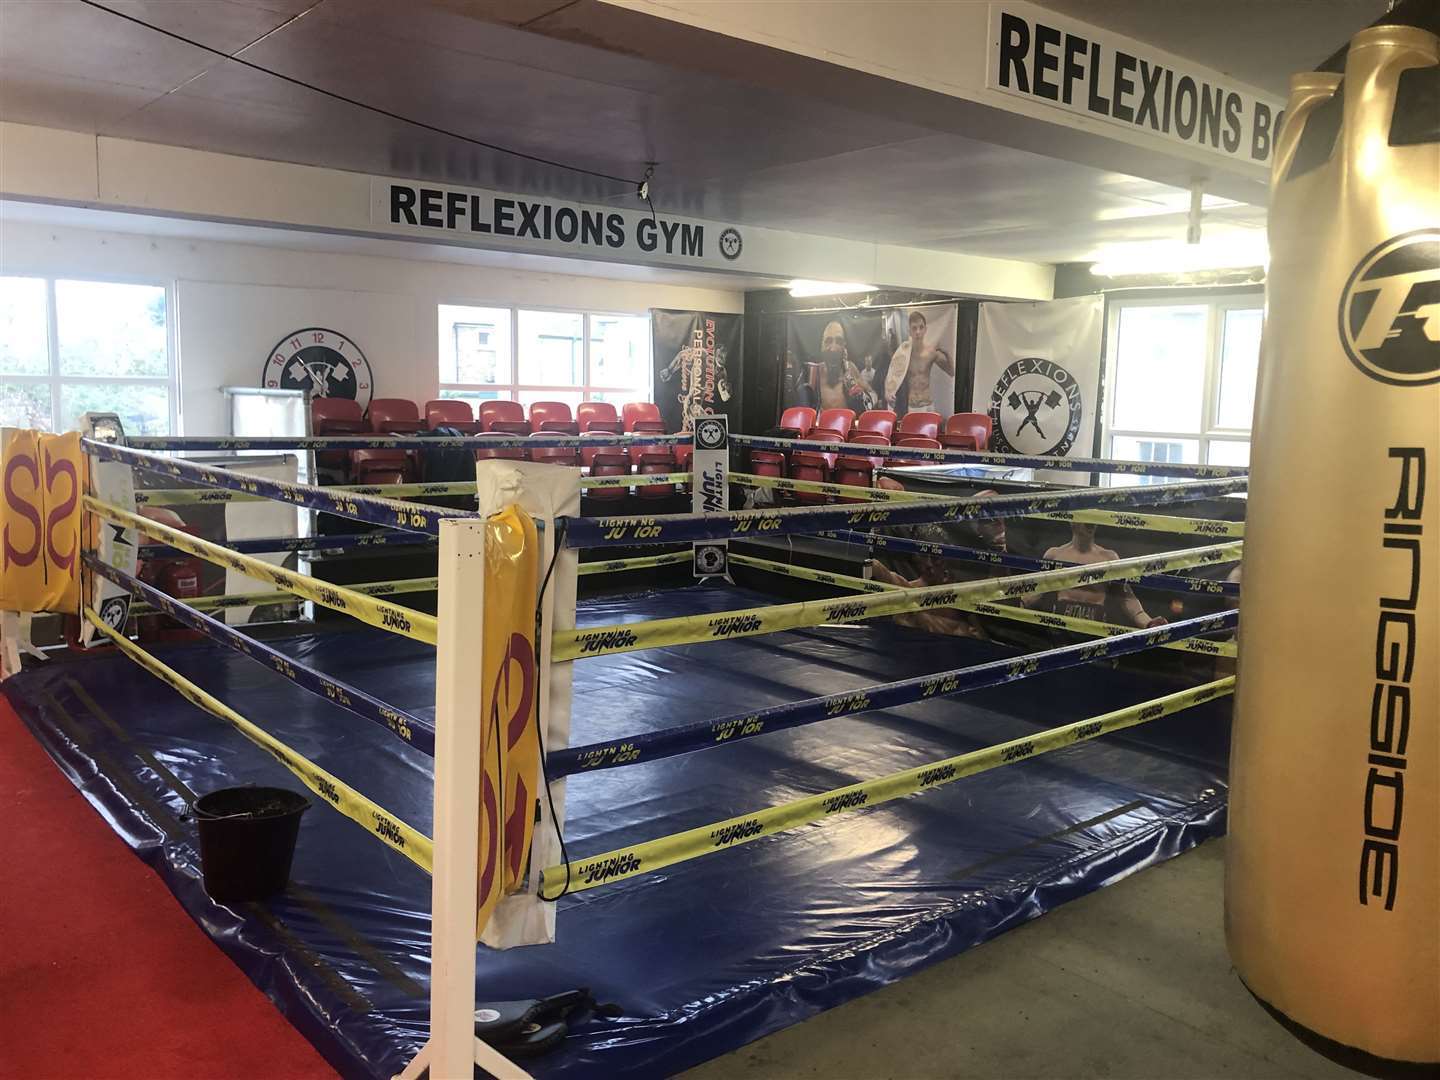 Reflexions have opened a new boxing facility as they aim to help the community